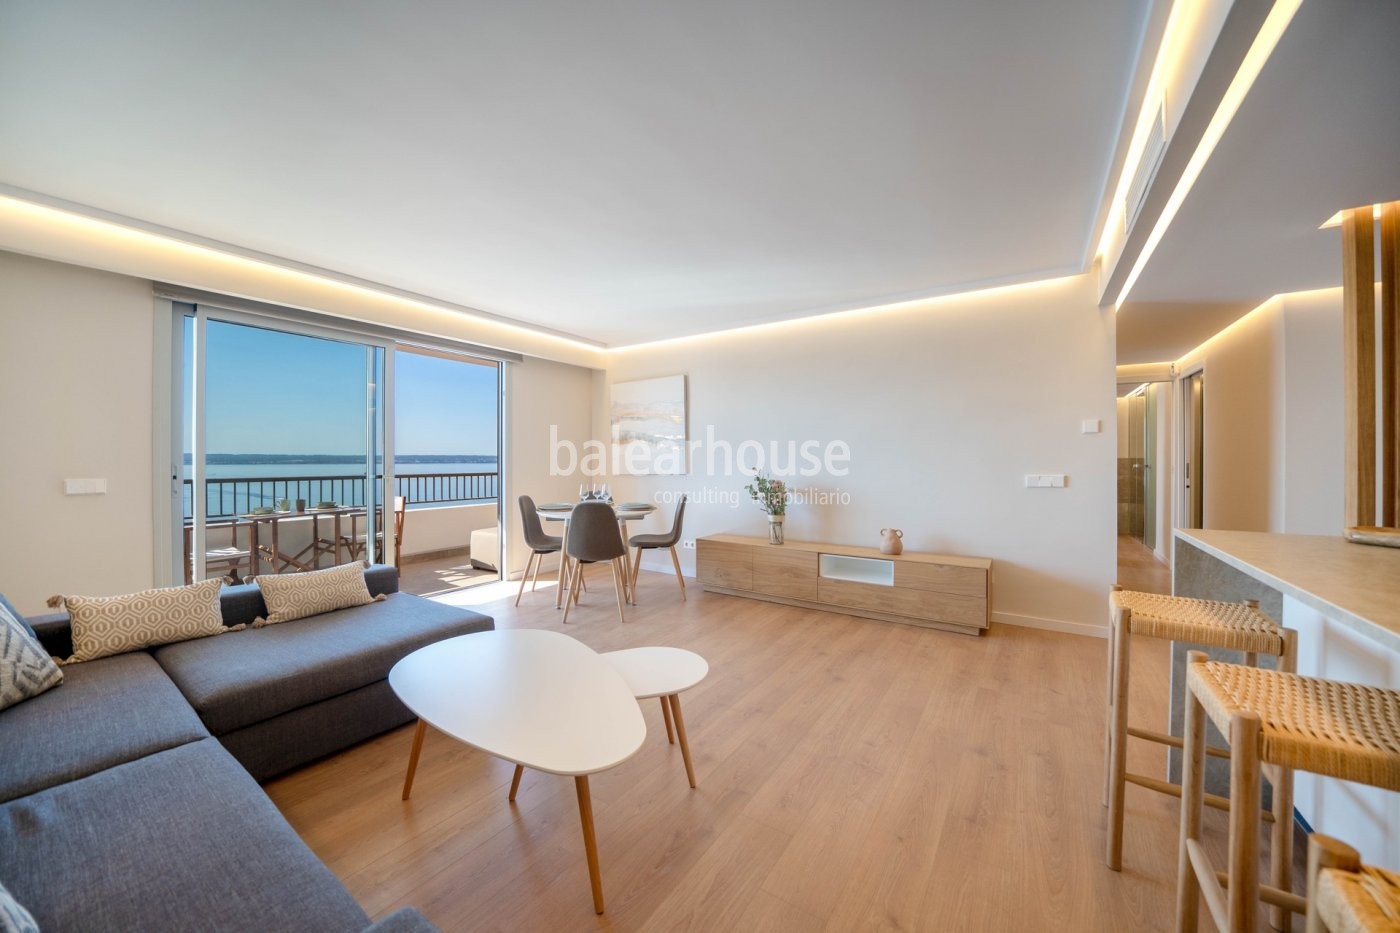 Stunning sea views in this frontline penthouse with modern interiors in Palma.